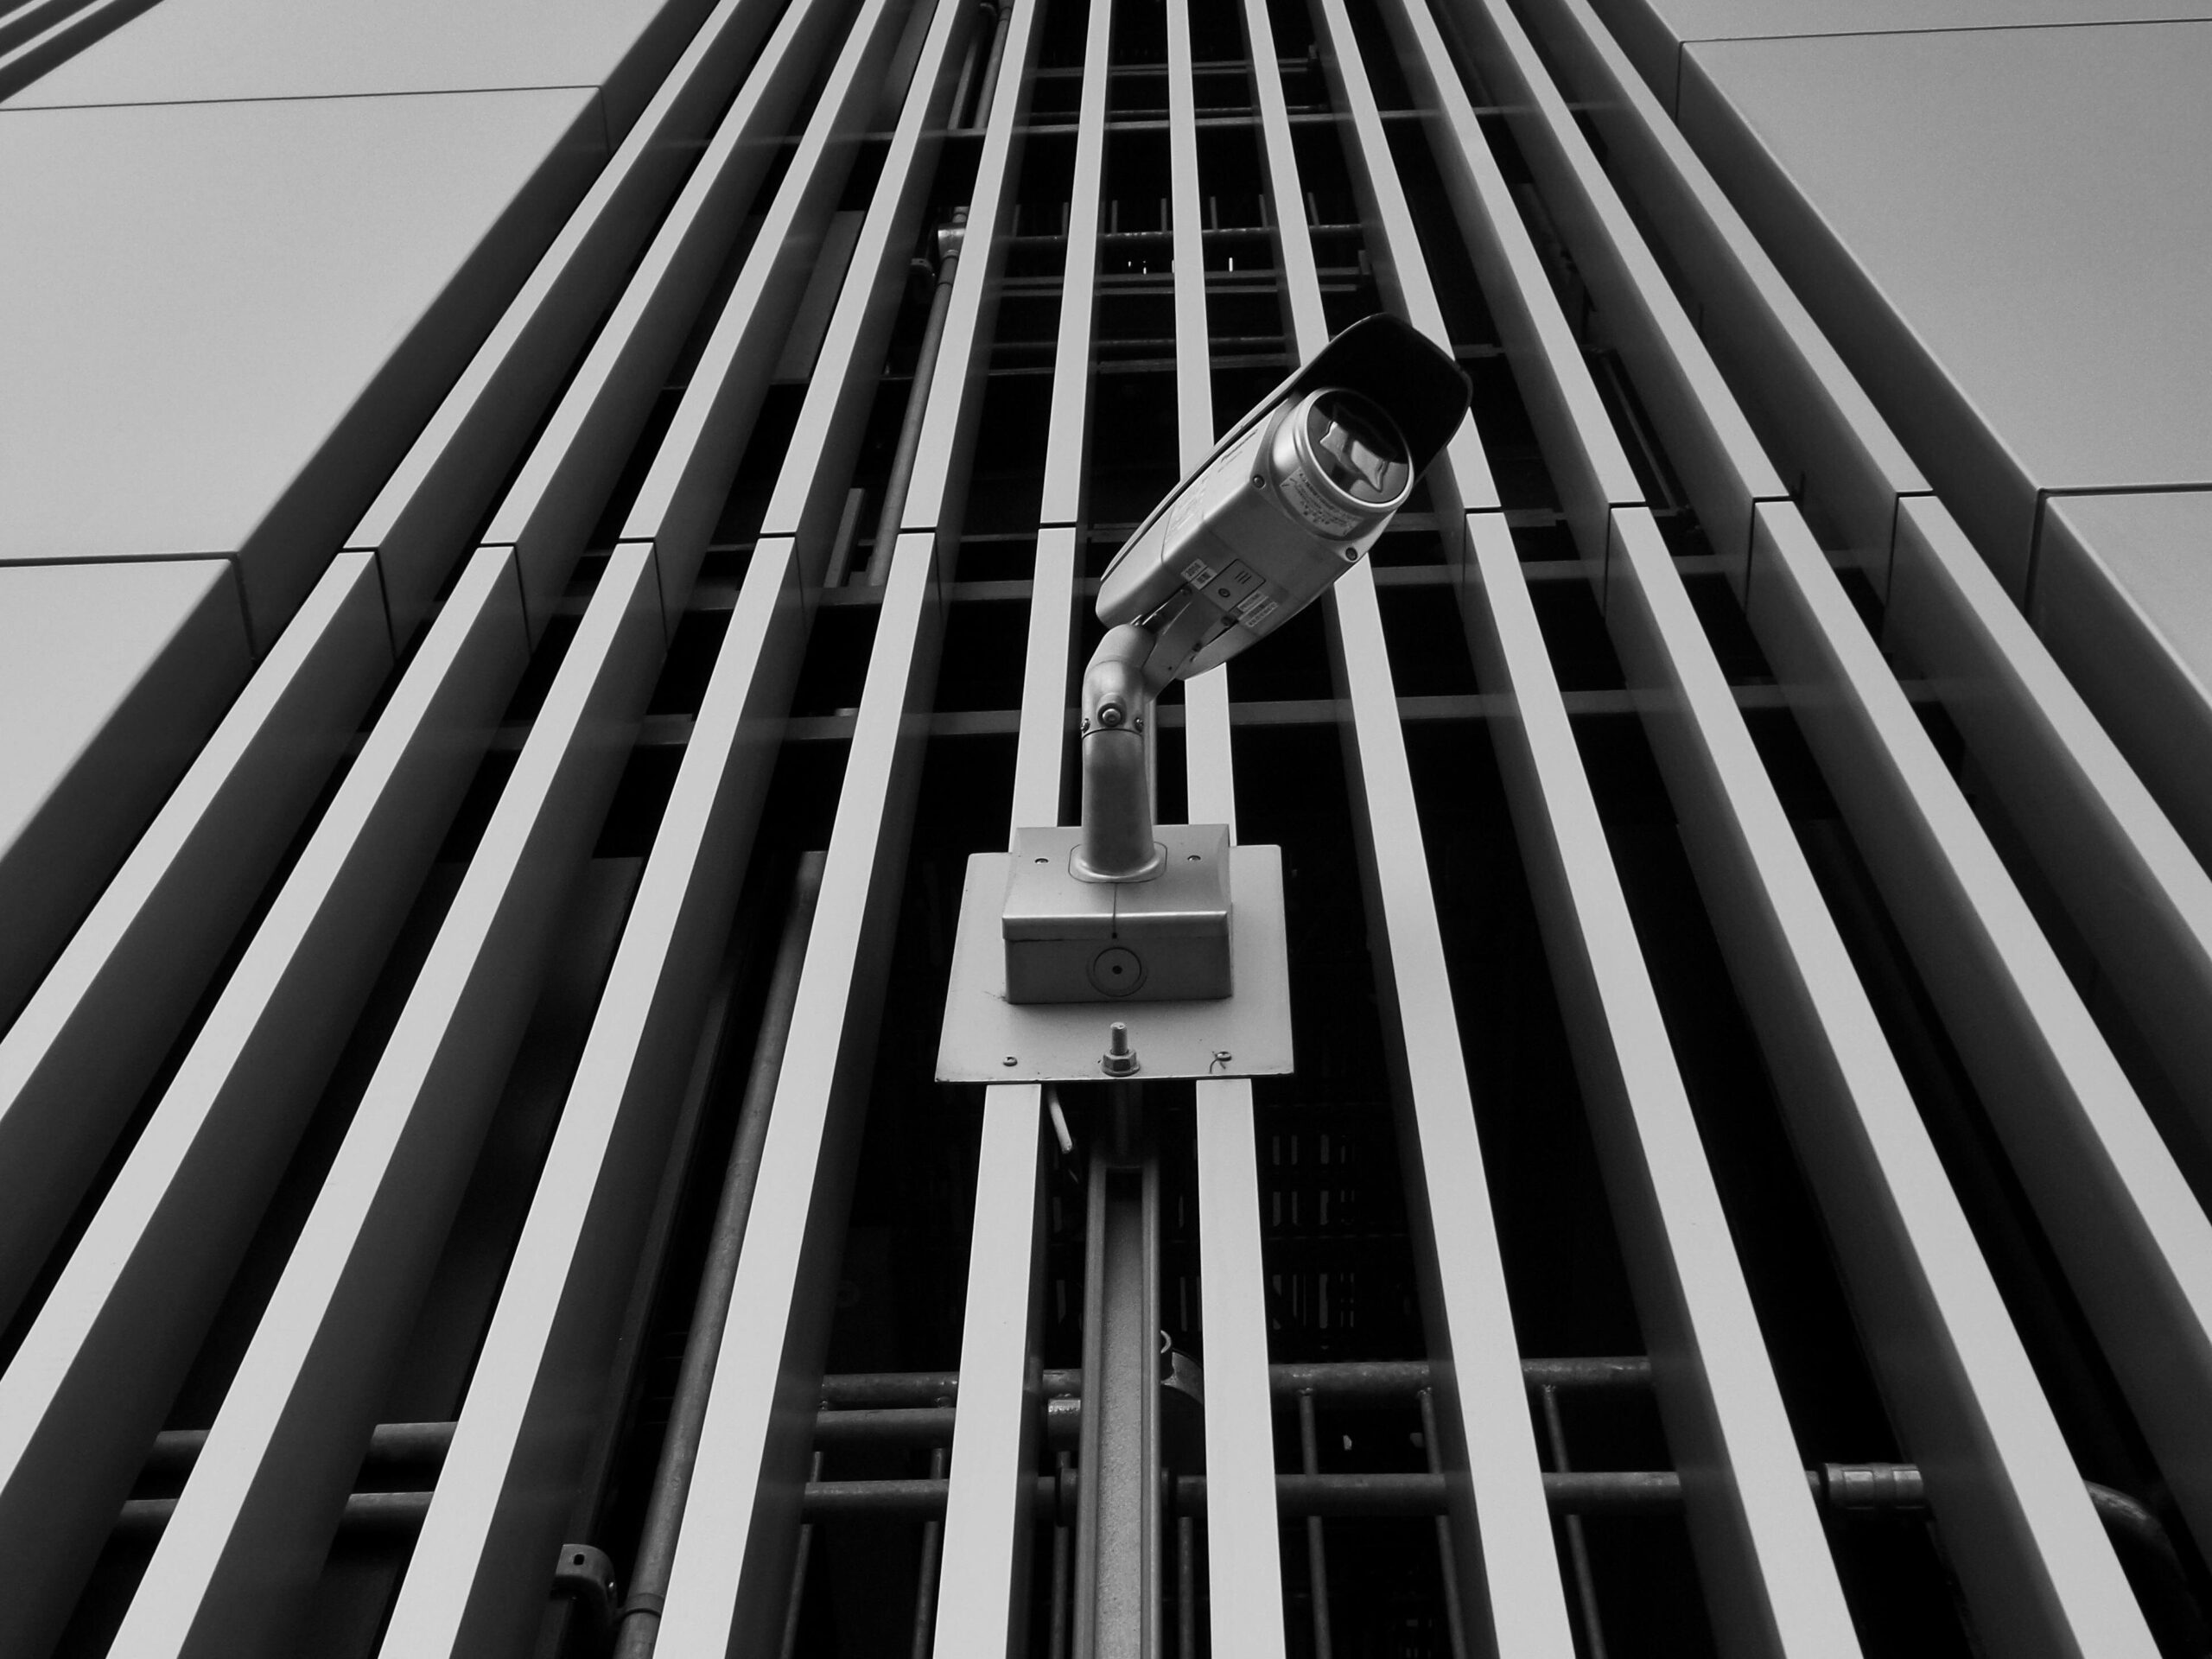 CCTV on skyscraper - many buildings have CCTV blindspots that many systems may not have contingency for